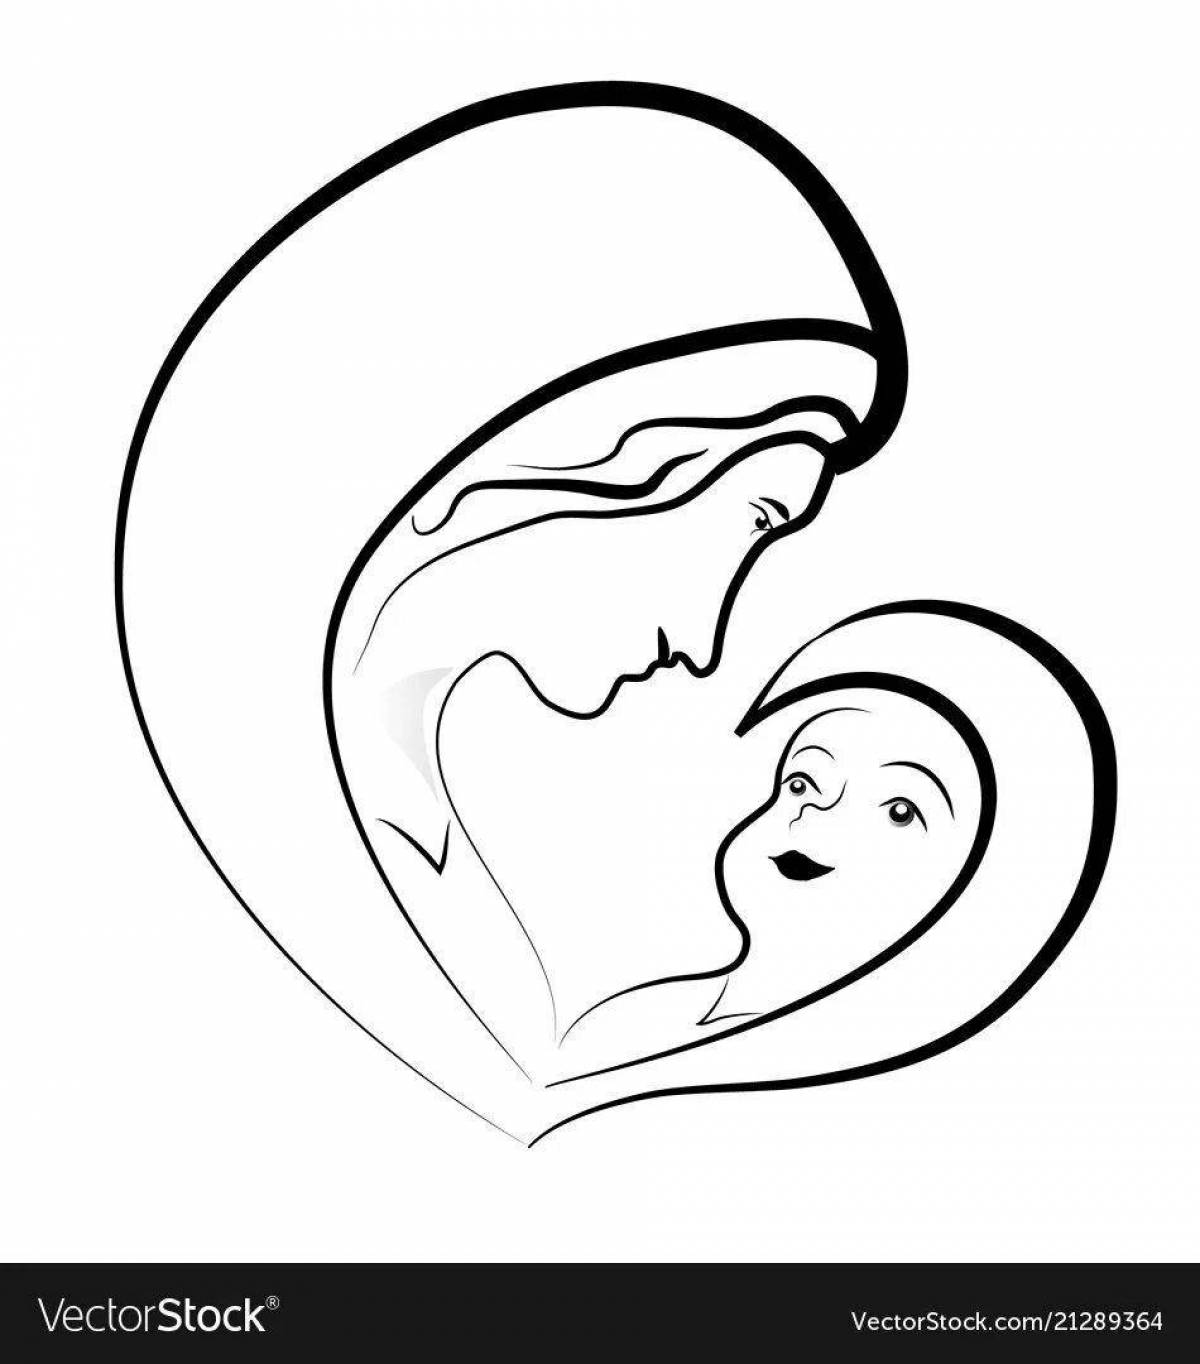 Serene coloring of virgin mary and child